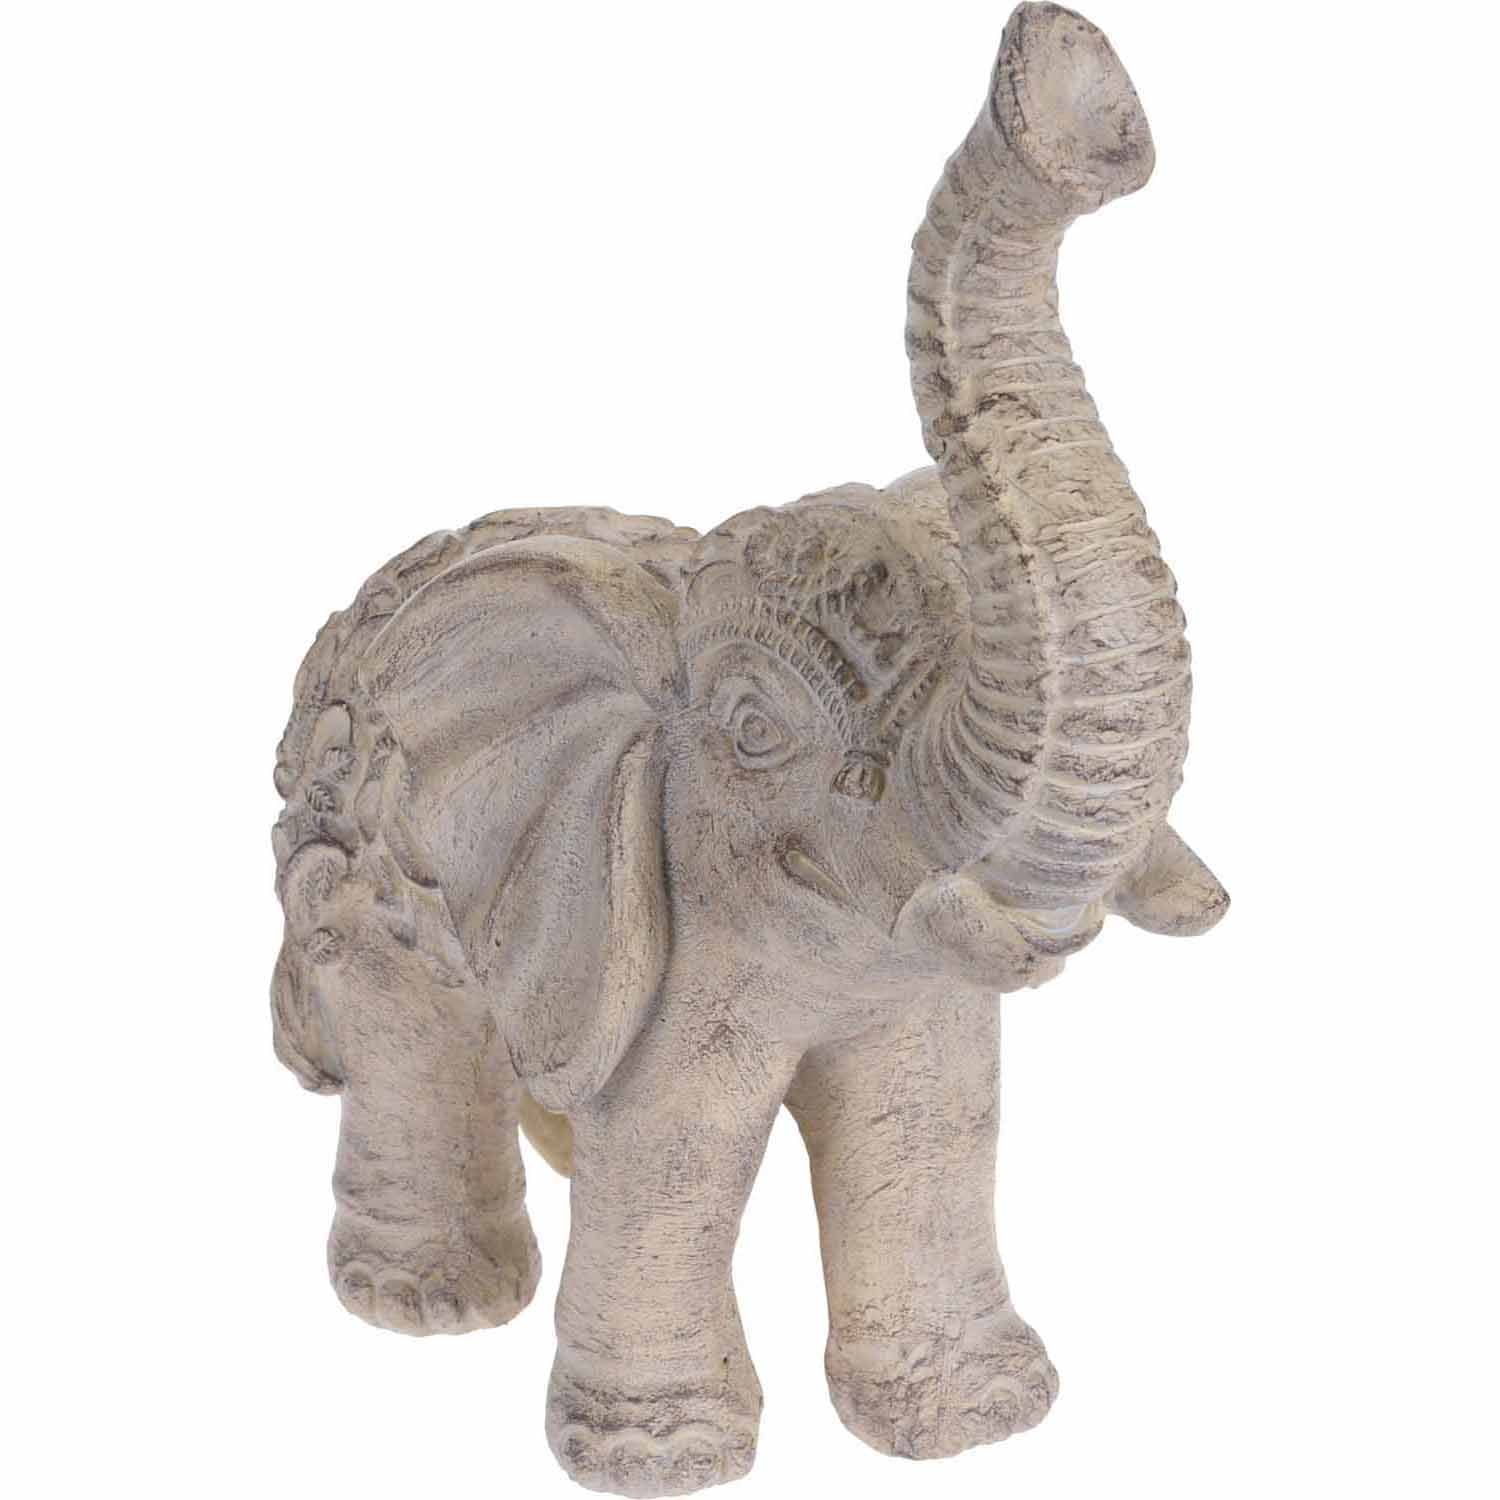 The Home Elephant Ornament 1 Shaws Department Stores